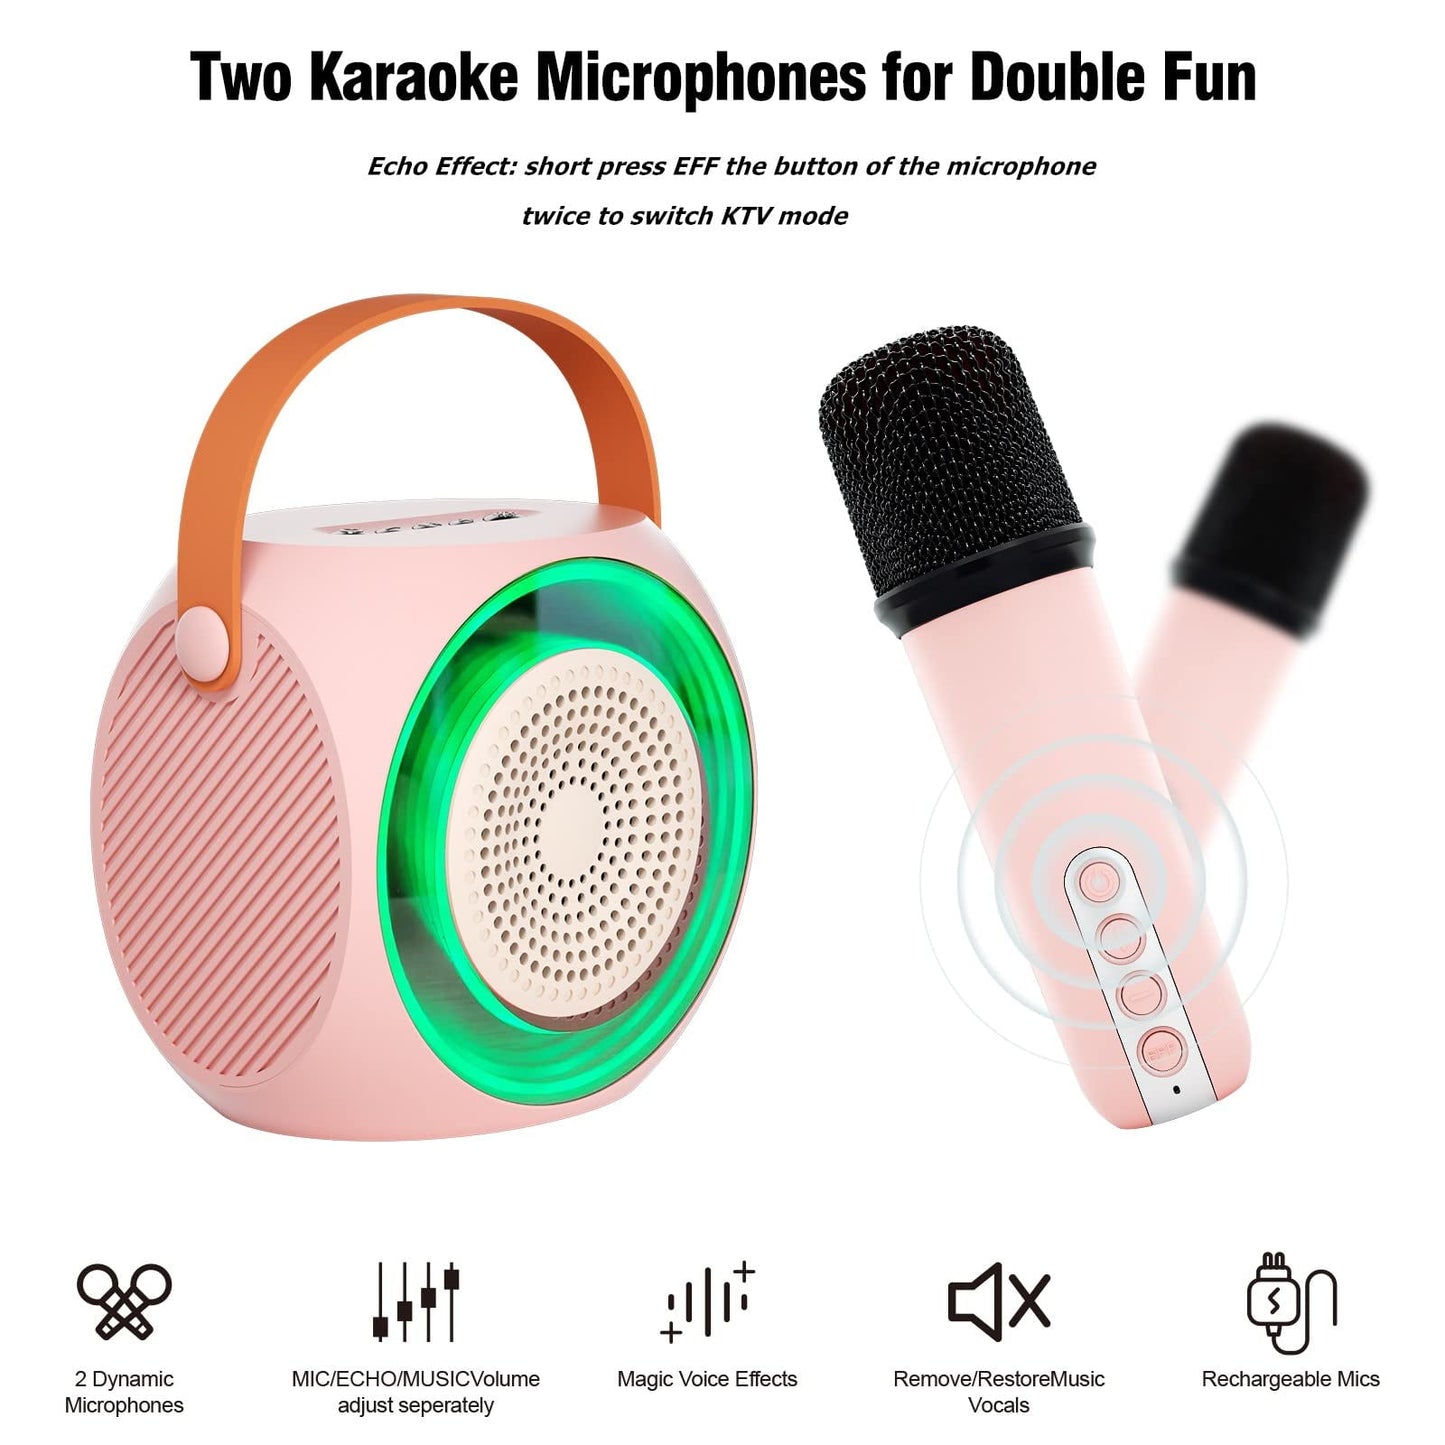 BONAOK Mini Karaoke Machine for Kids Adults, Portable Karaoke Speaker with 2 Wilreless Microphones and Bluetooth for Home Party, Birthday Gifts for Boys/Girls(Pink)